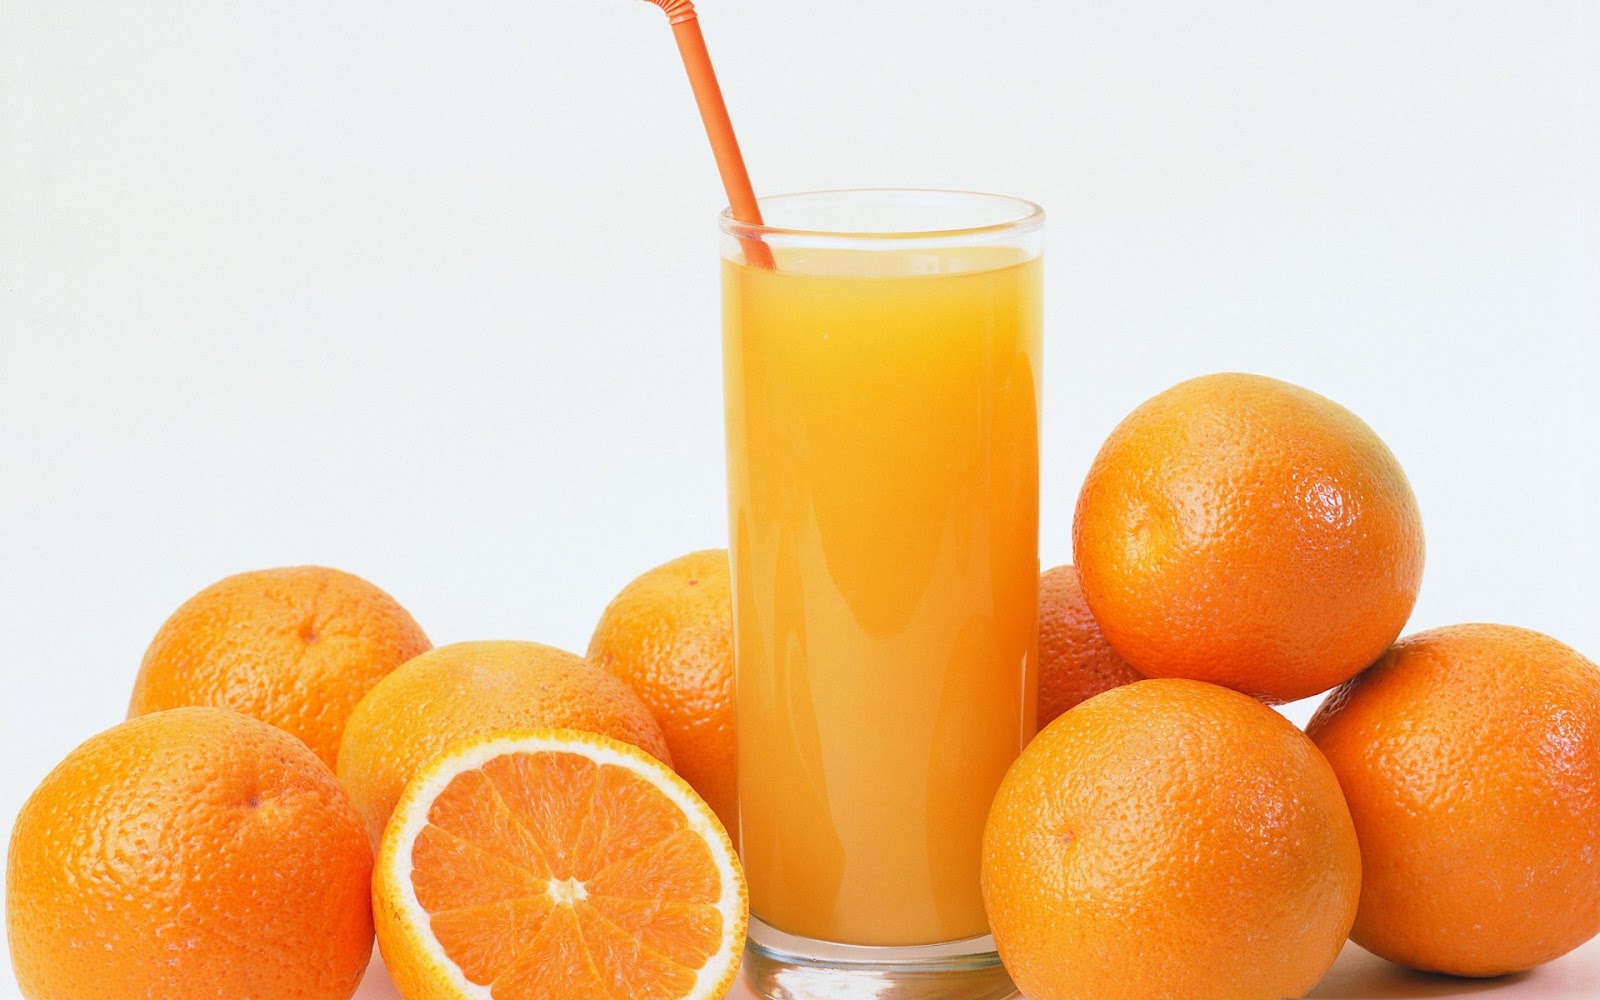 Ready To Ditch The Chemicals And Added Sugar In Store-Bought Juice Yet? Read Here! 2